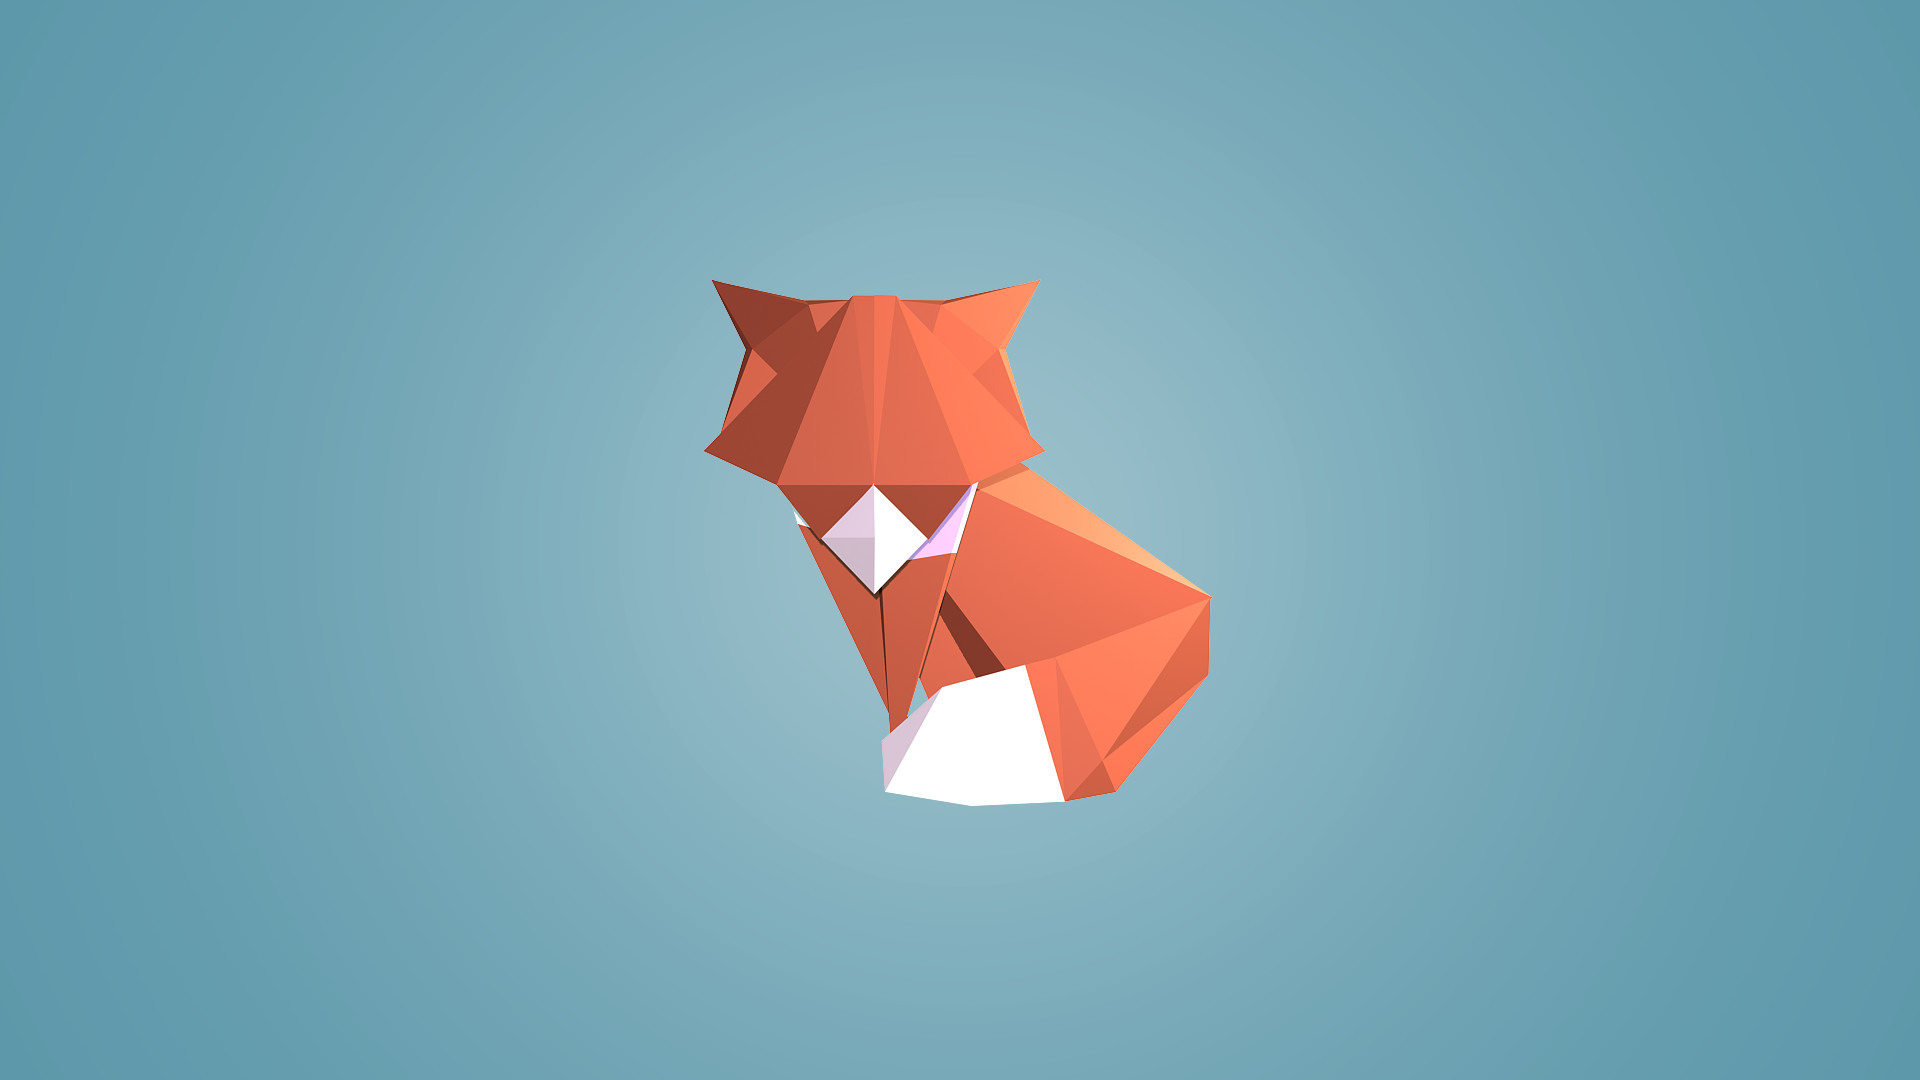 Digital Art, Low Poly, Animals, Fox, Blue Background, Simple Background,